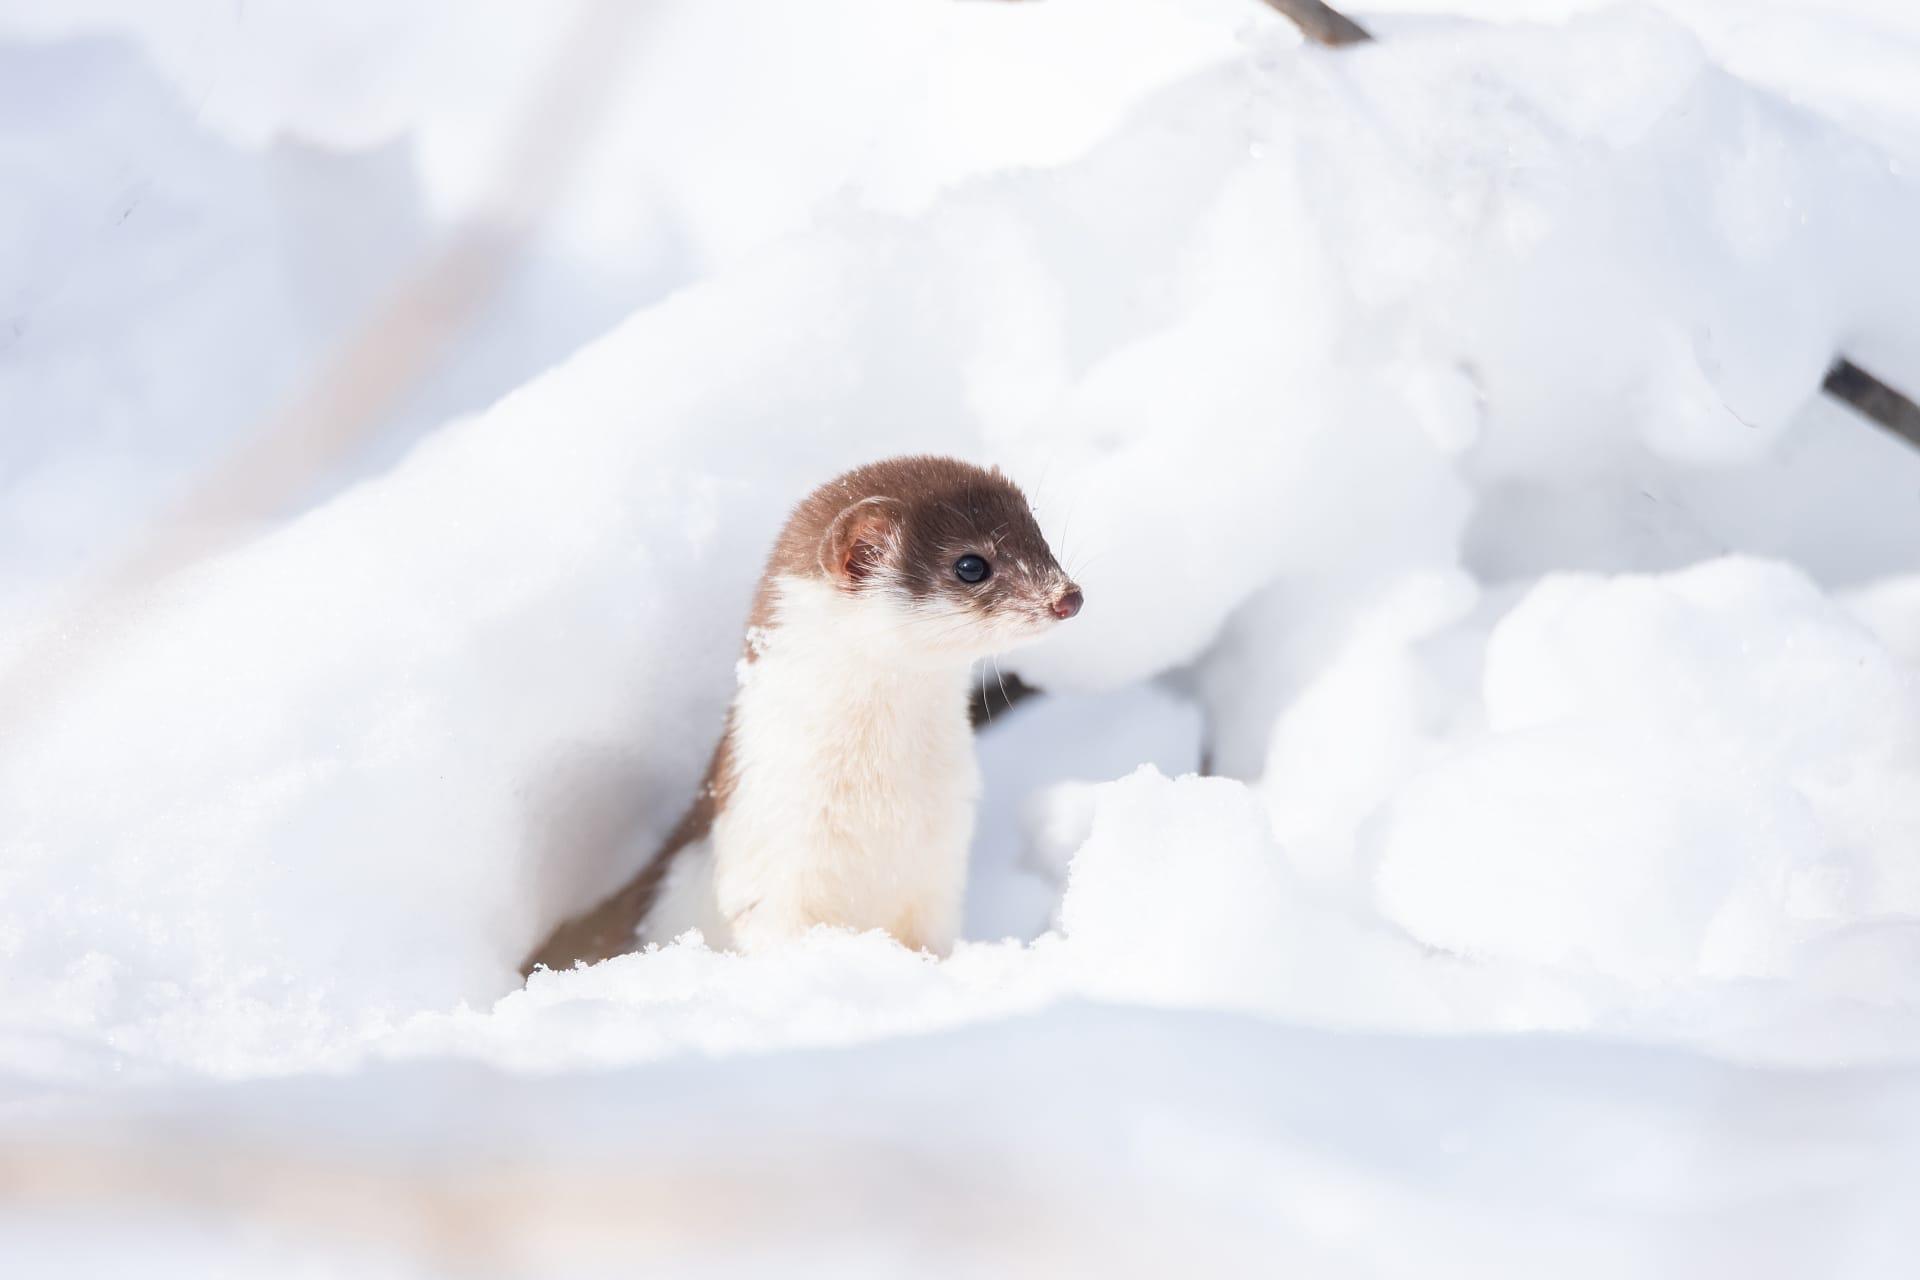 Weasel pictures